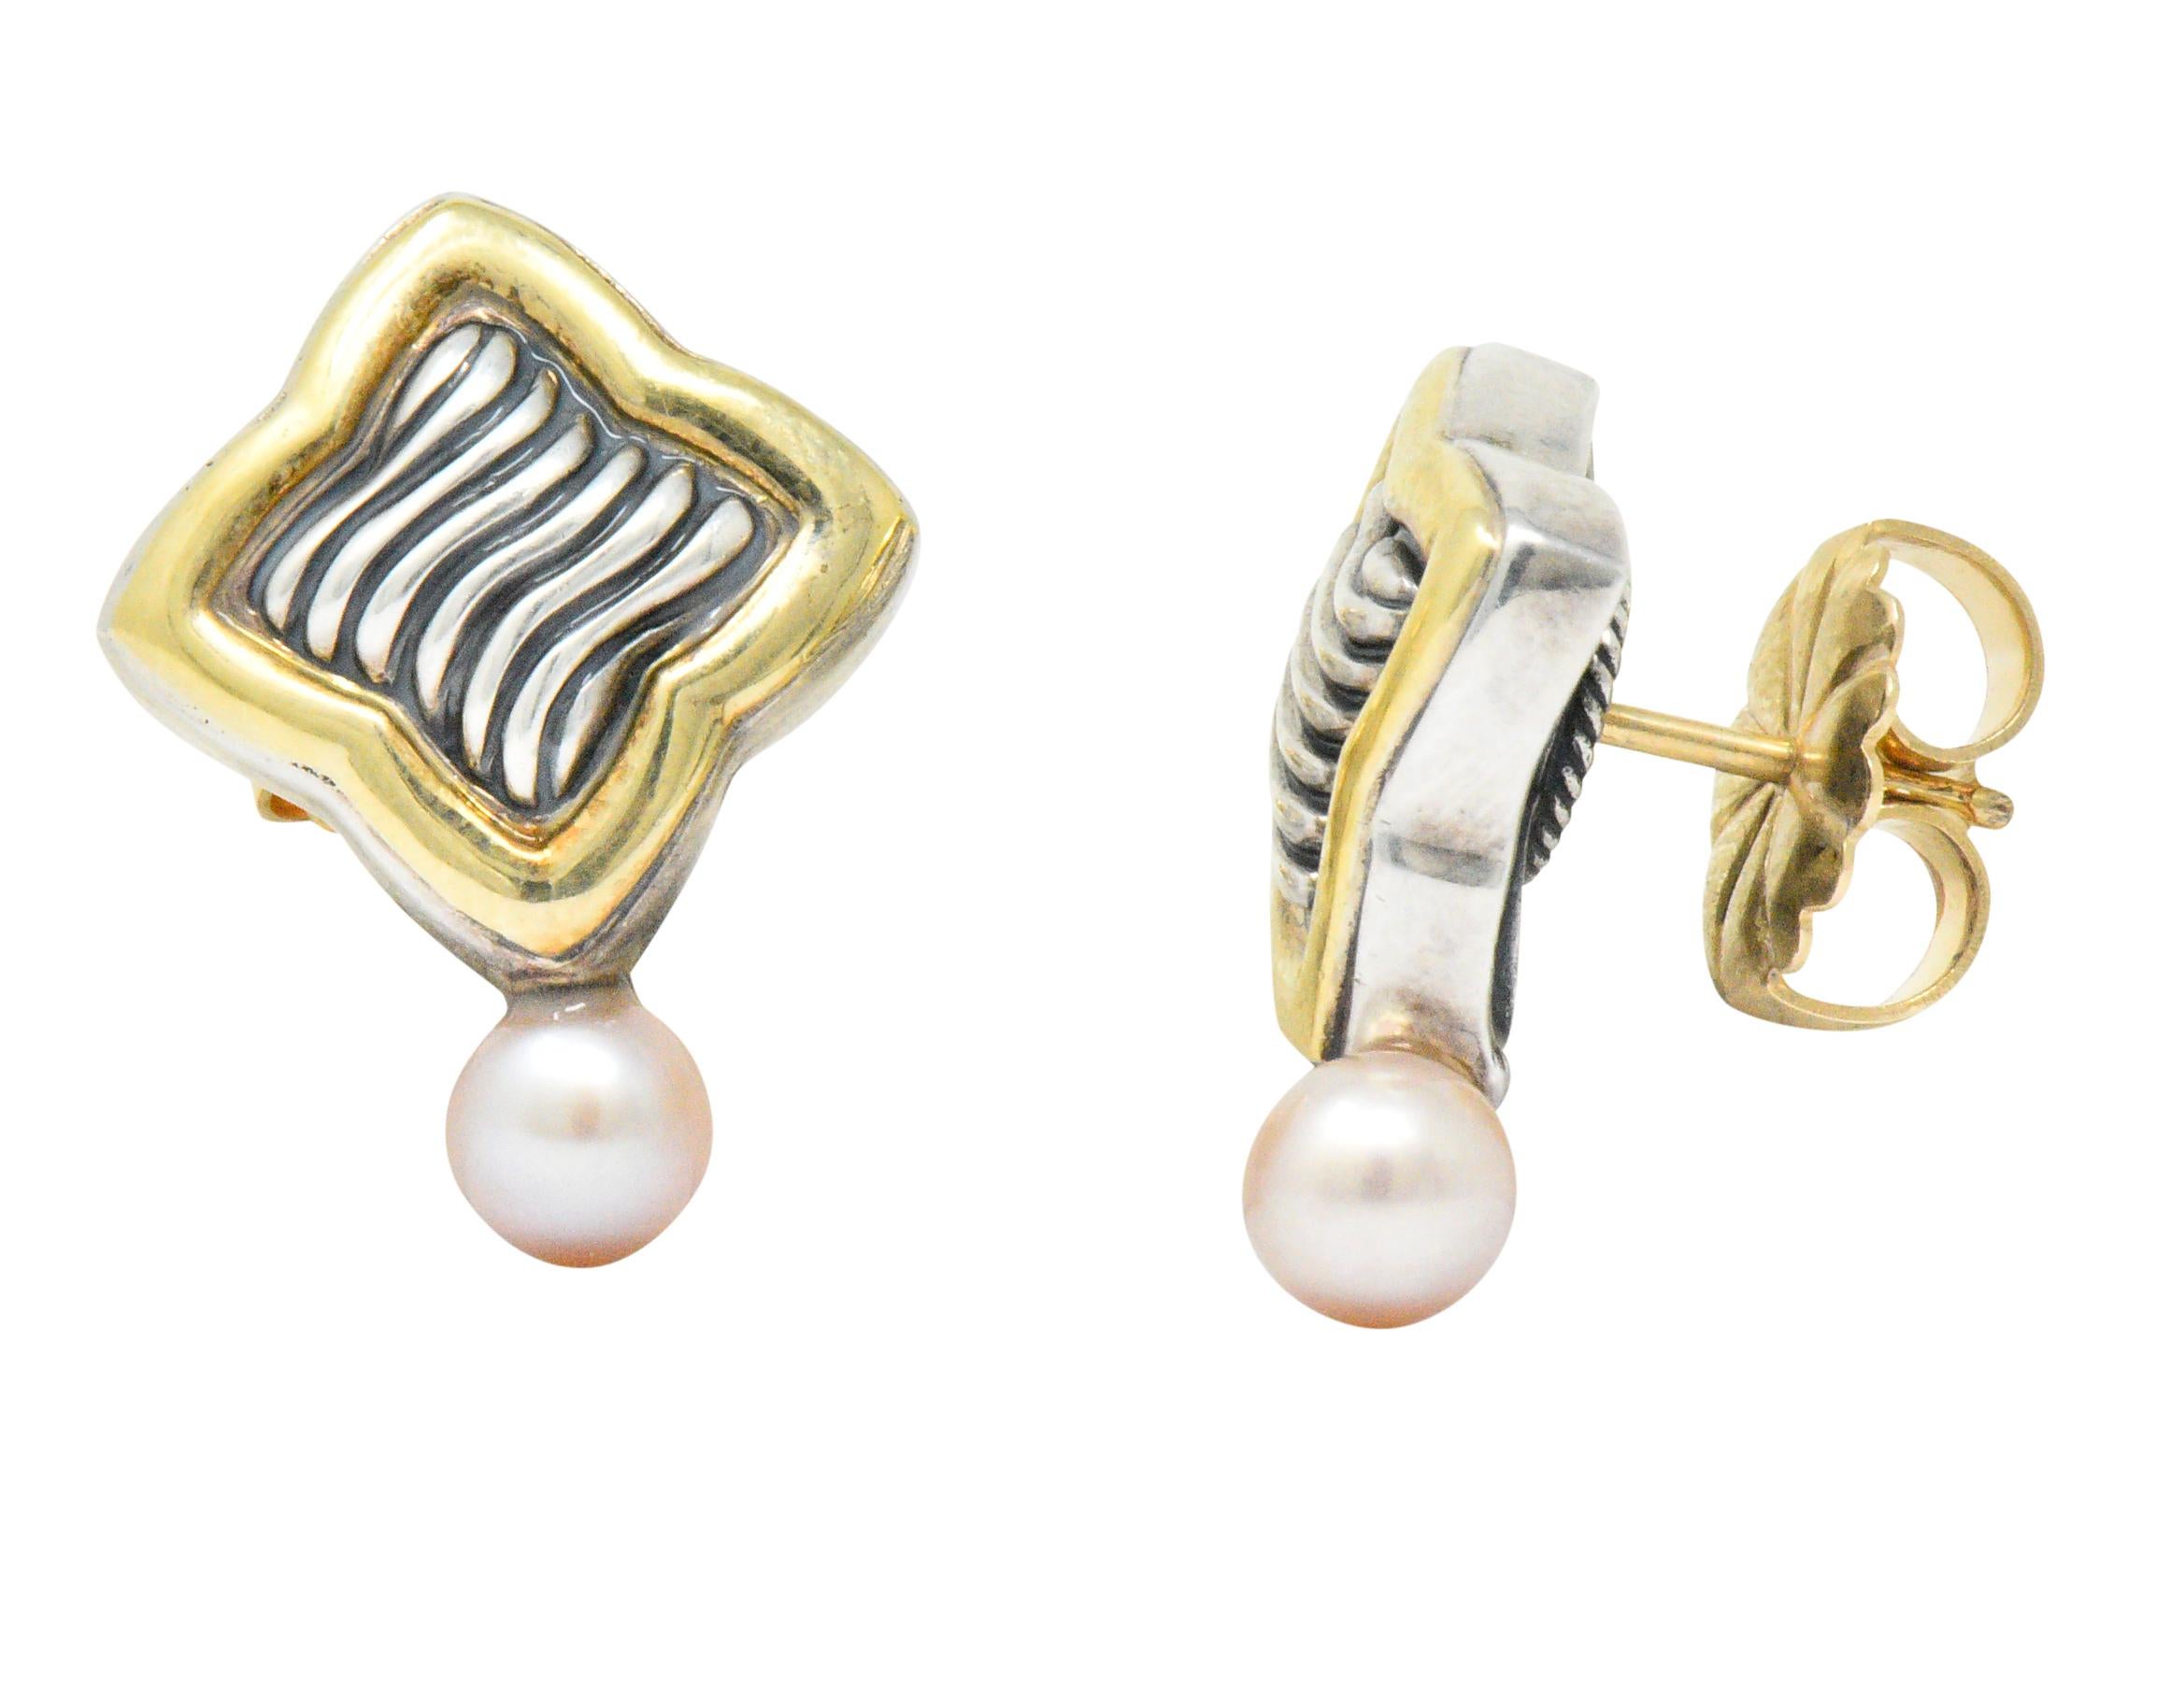 Earrings designed as a quatrefoil surmount with deeply ridged silver surrounded by high polished gold

Terminating as a 5.0 mm pearl, white in body color with strong rosé overtones and excellent luster

Completed by posts and friction backs

From